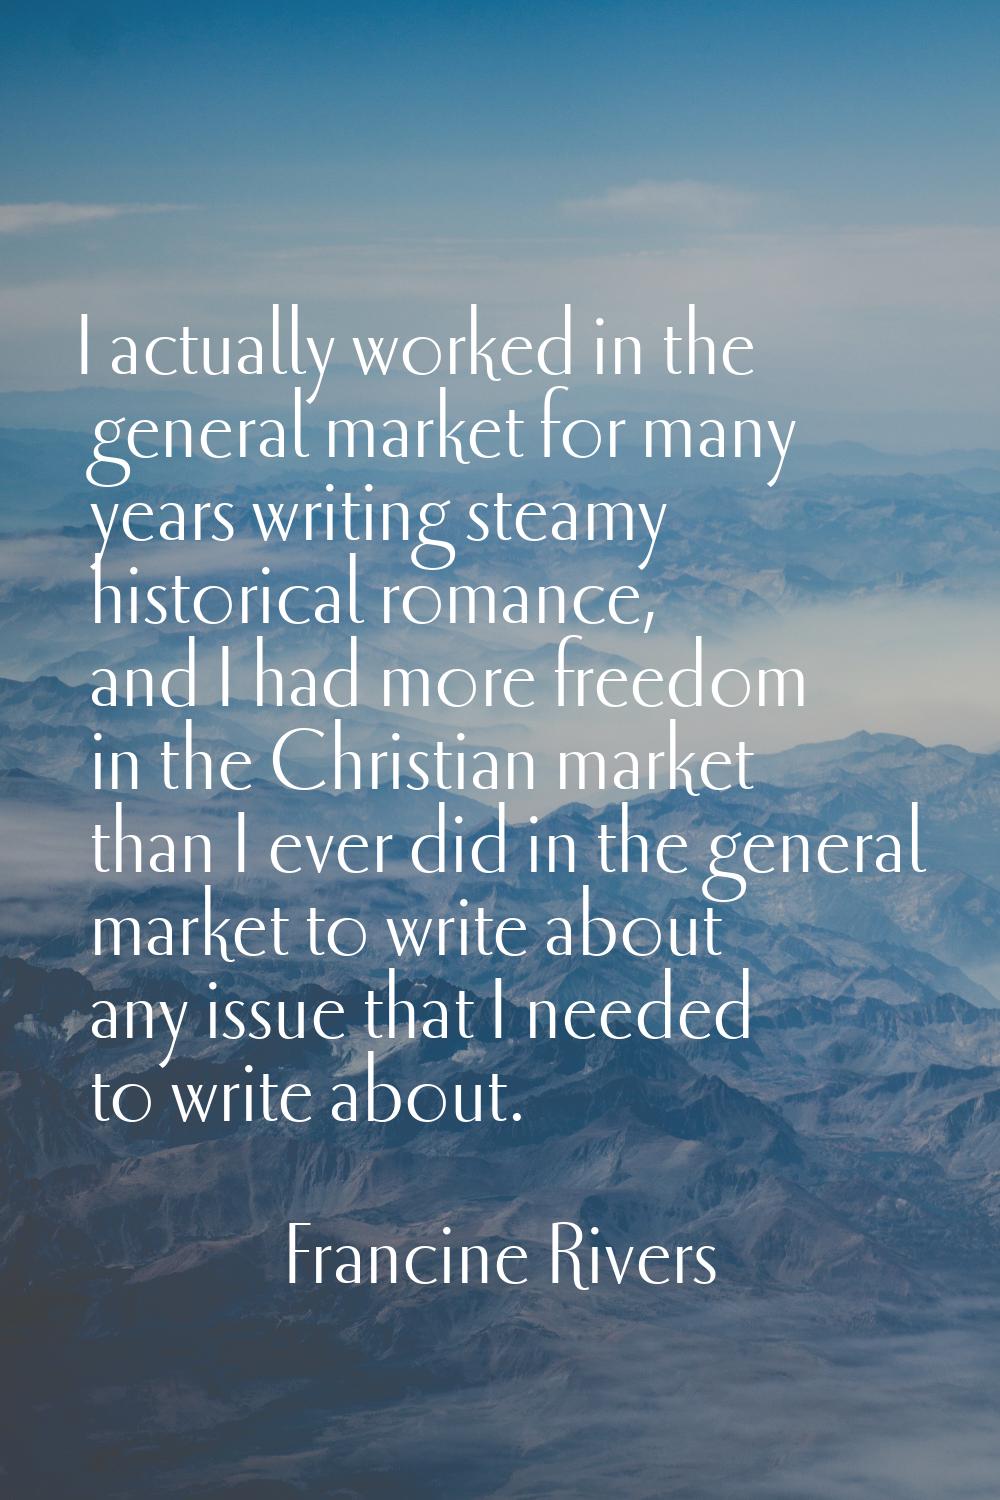 I actually worked in the general market for many years writing steamy historical romance, and I had